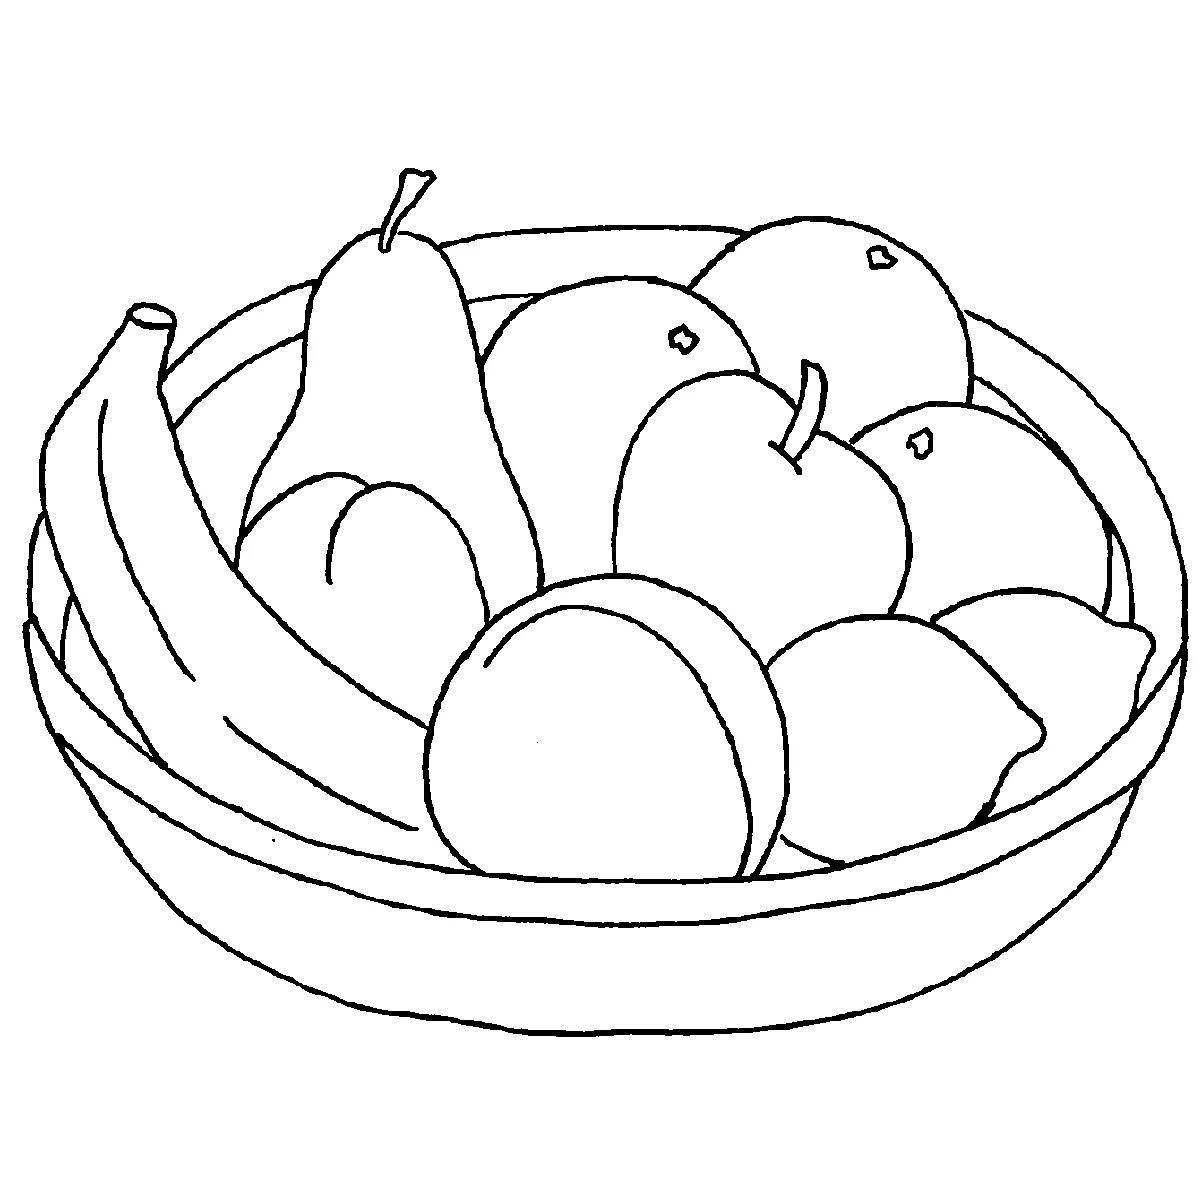 Relaxing fruit plate coloring book for kids